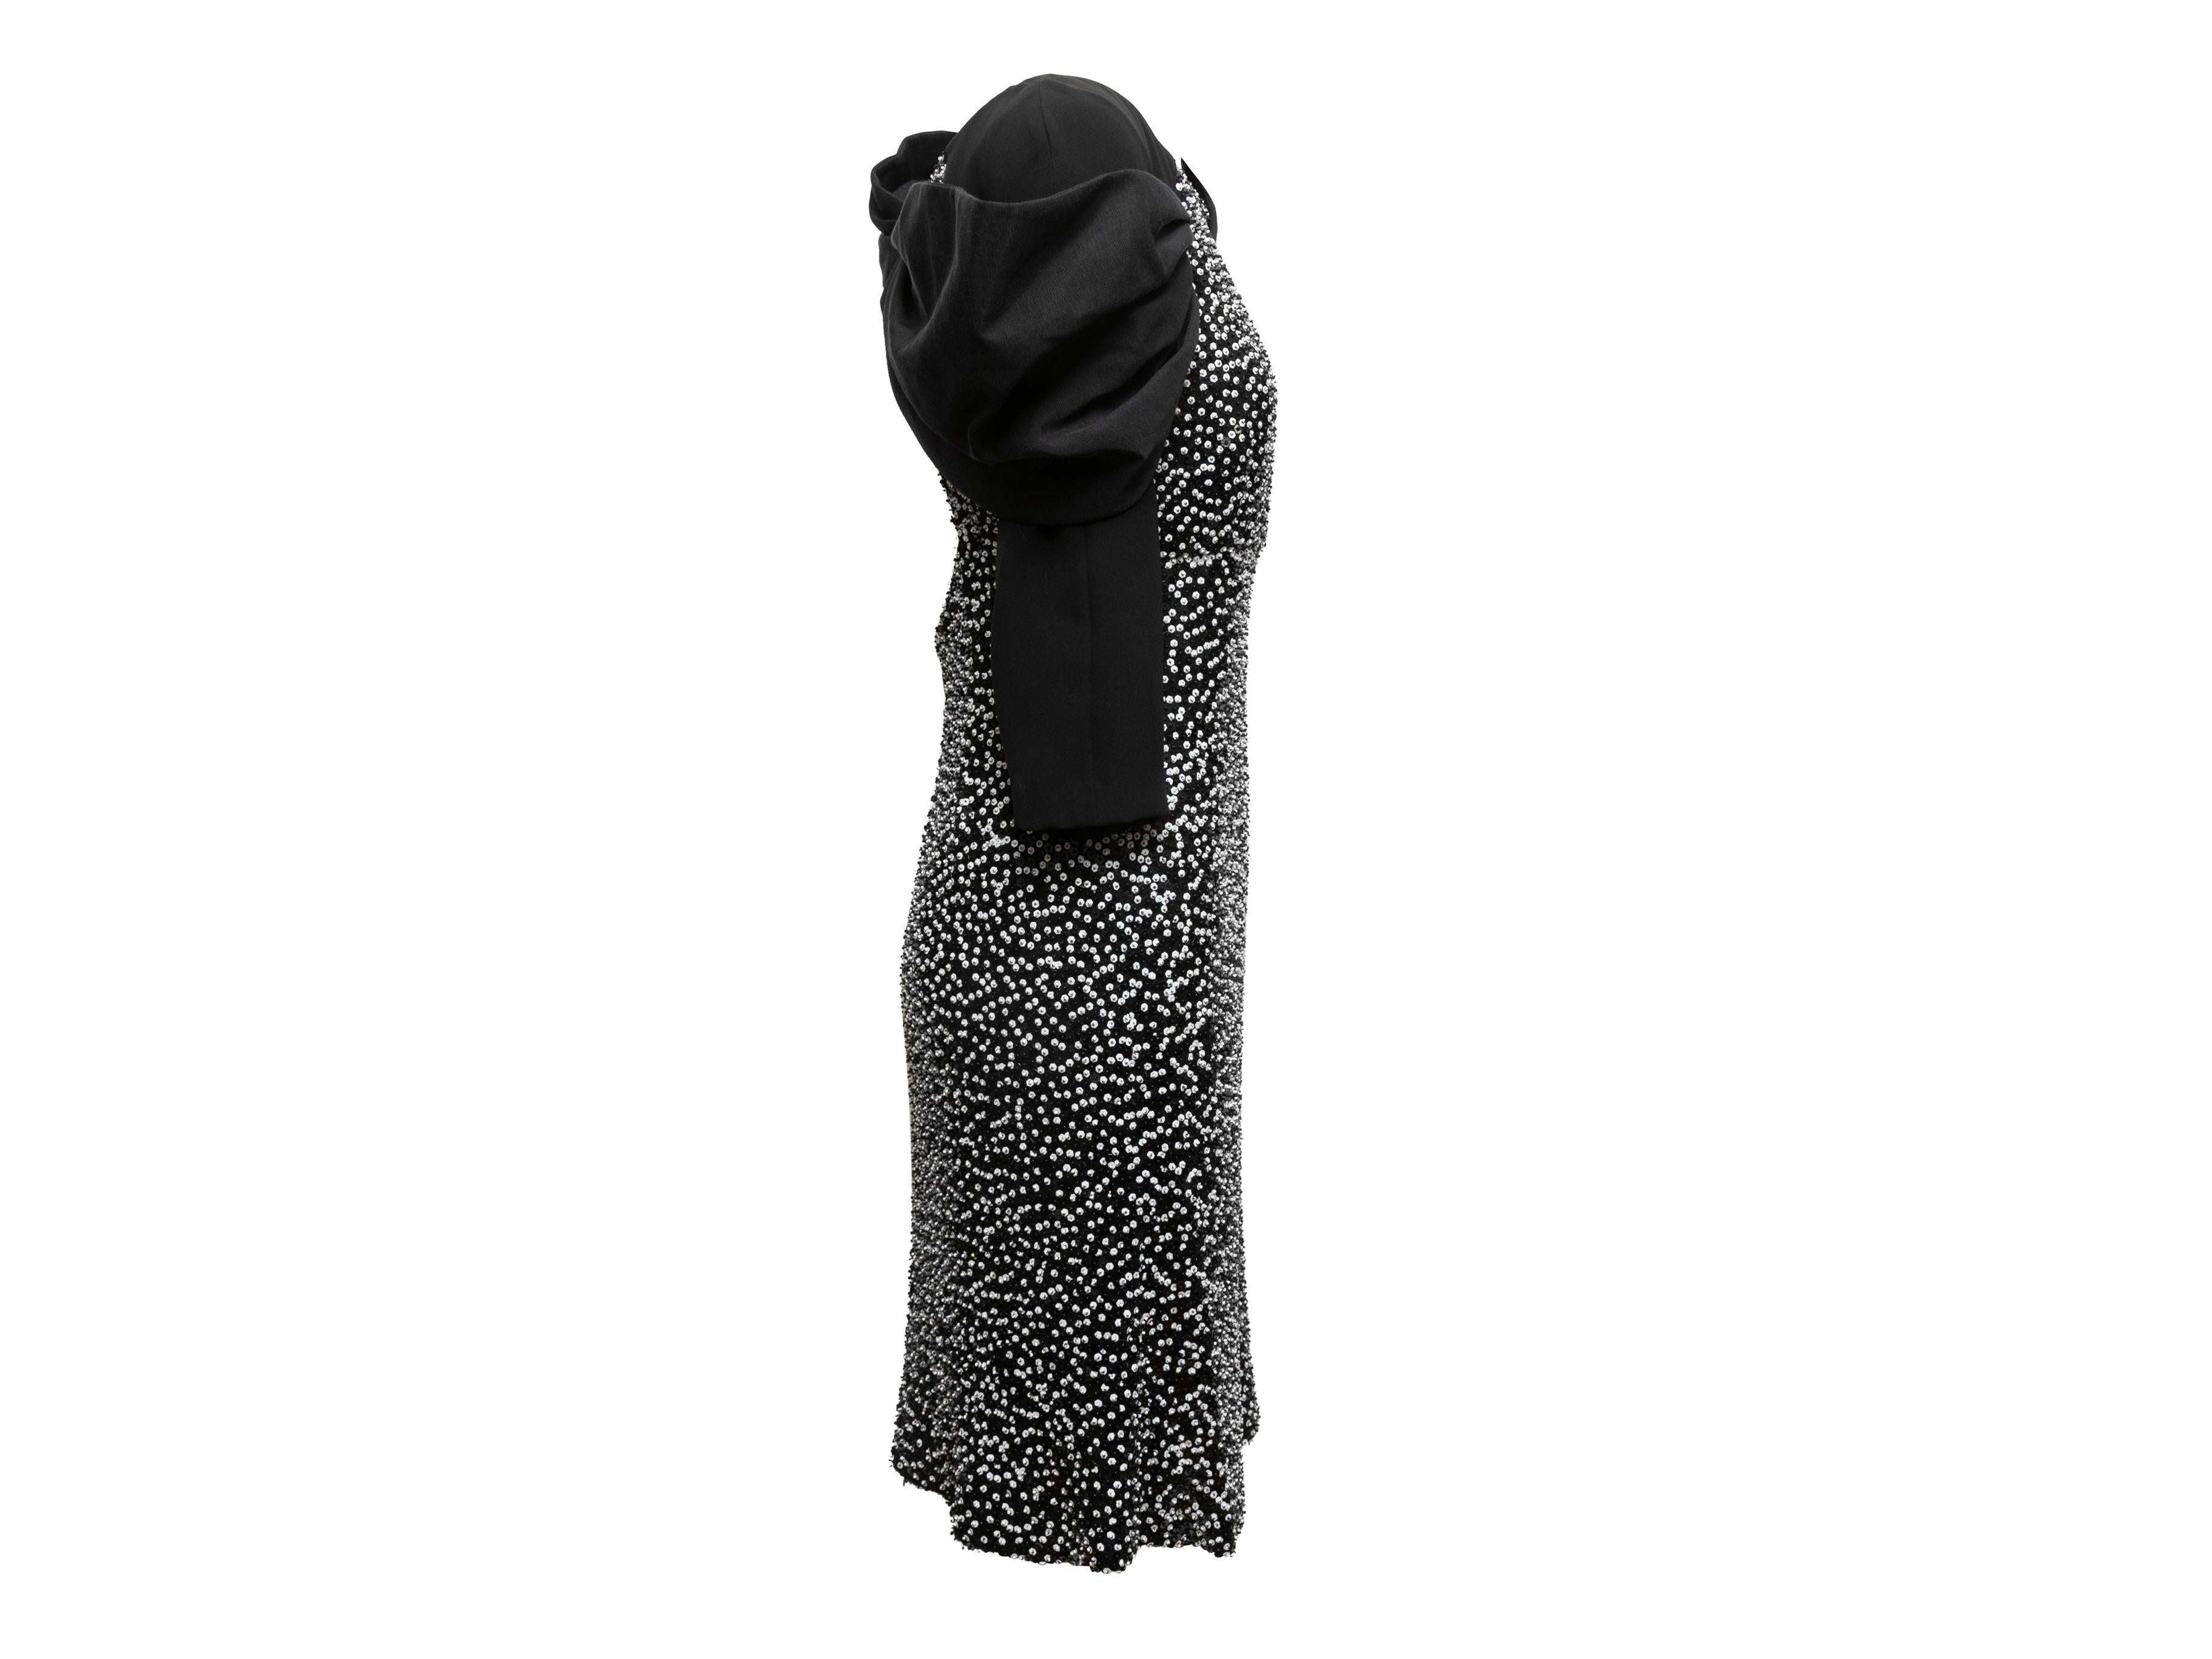 Black and white sequined bow dress by Giorgio Armani. Crew neck. Three-quarter sleeves. Oversized bow accent at back. 34